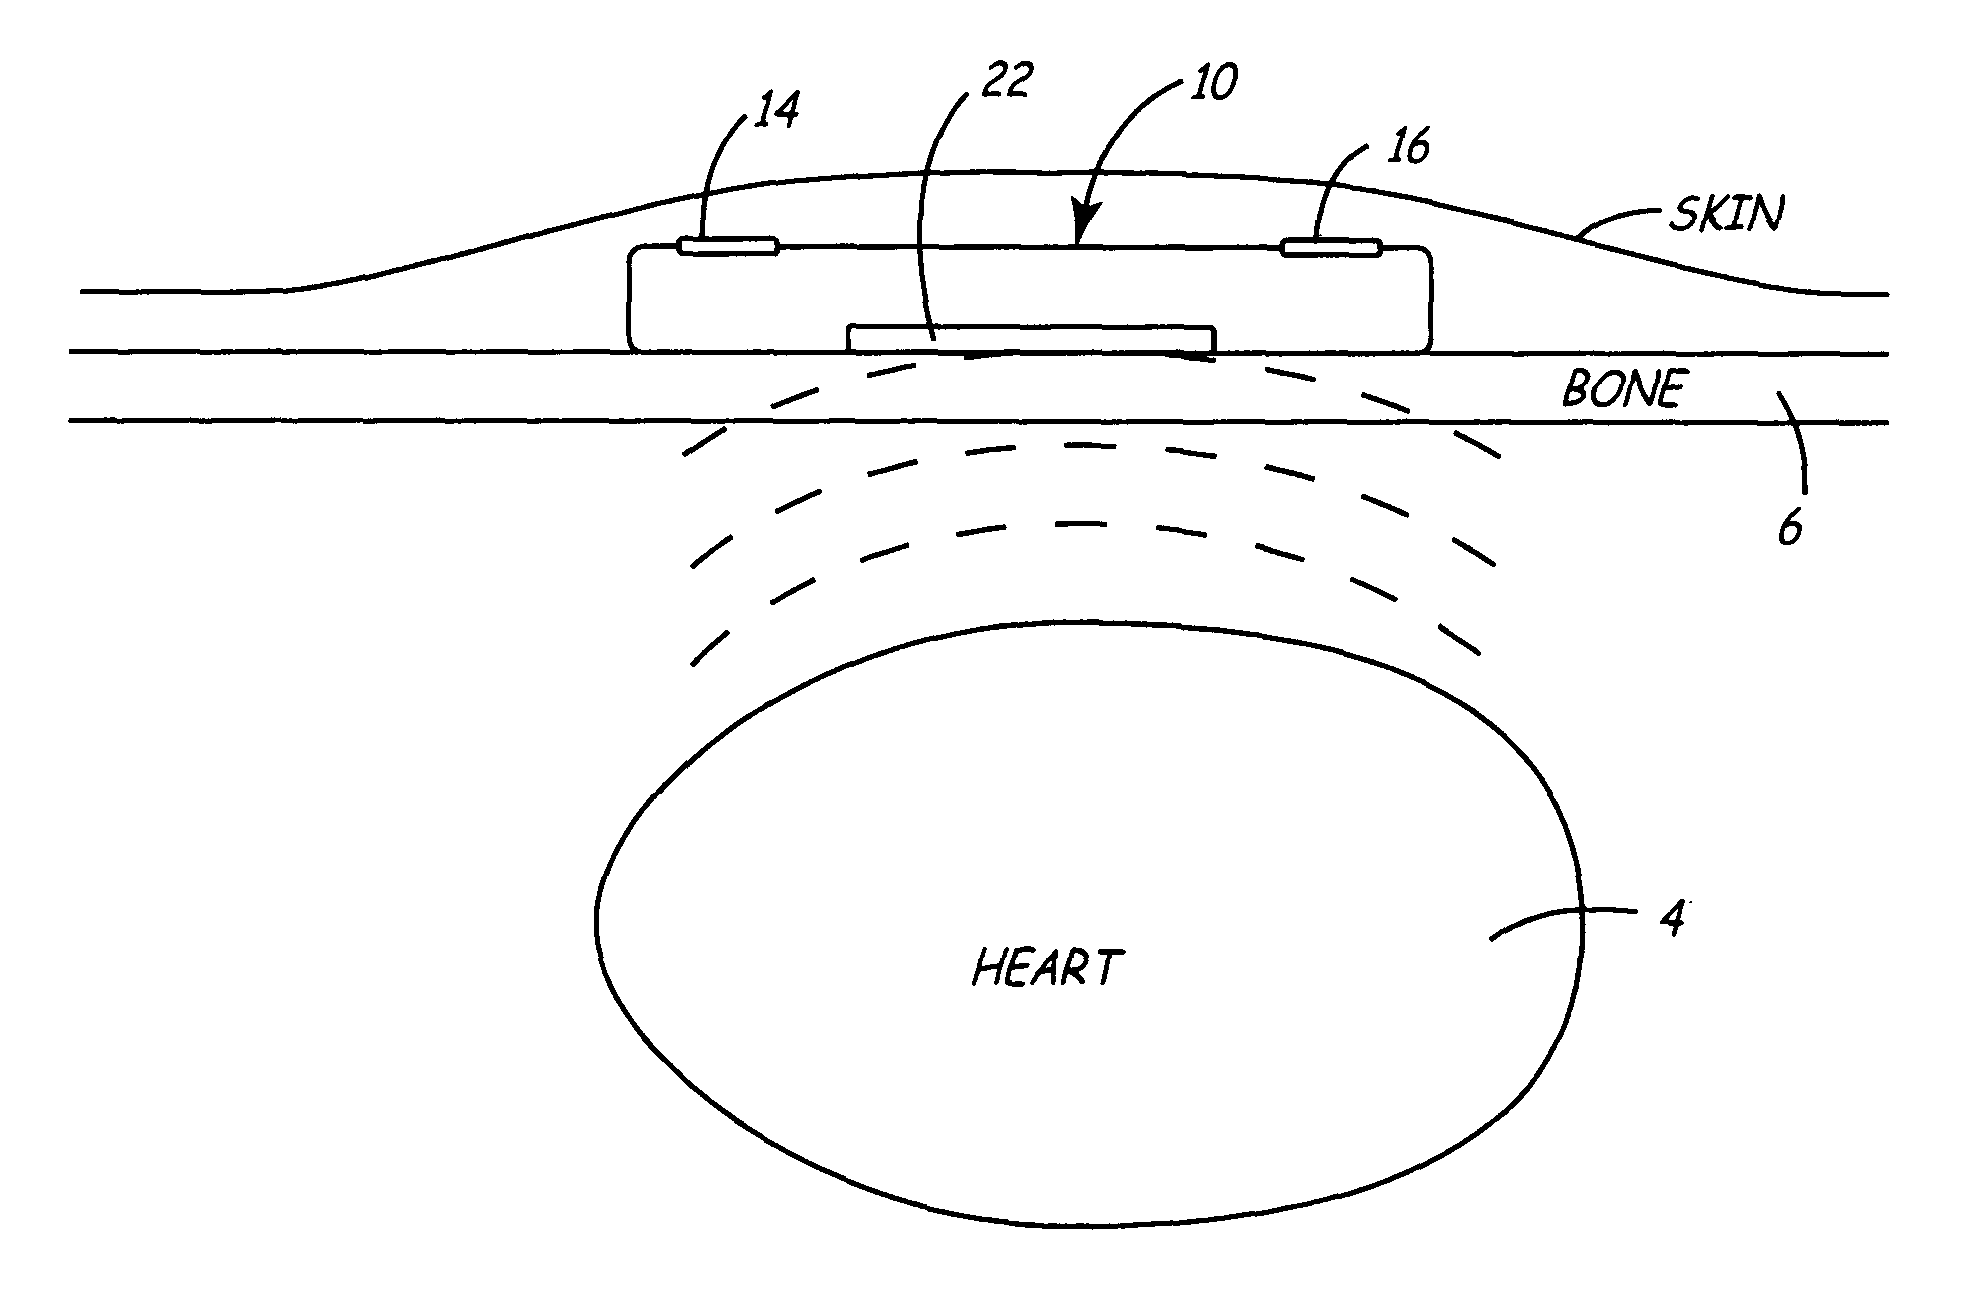 Method and apparatus for monitoring heart function in a subcutaneously implanted device